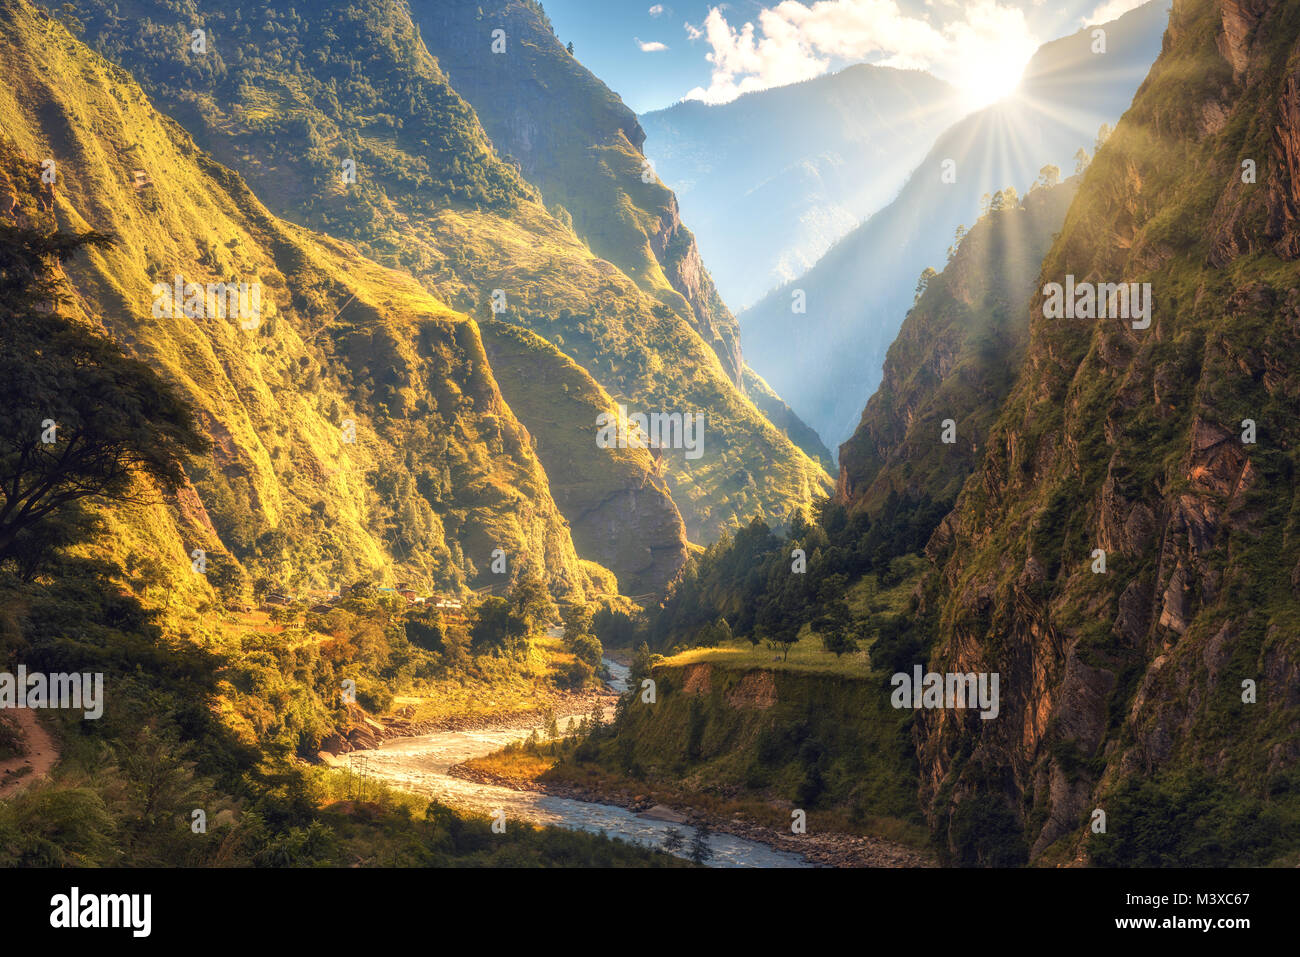 Colorful landscape with high Himalayan mountains, beautiful curving river, green forest, blue sky with clouds and yellow sunlight at sunset in autumn  Stock Photo